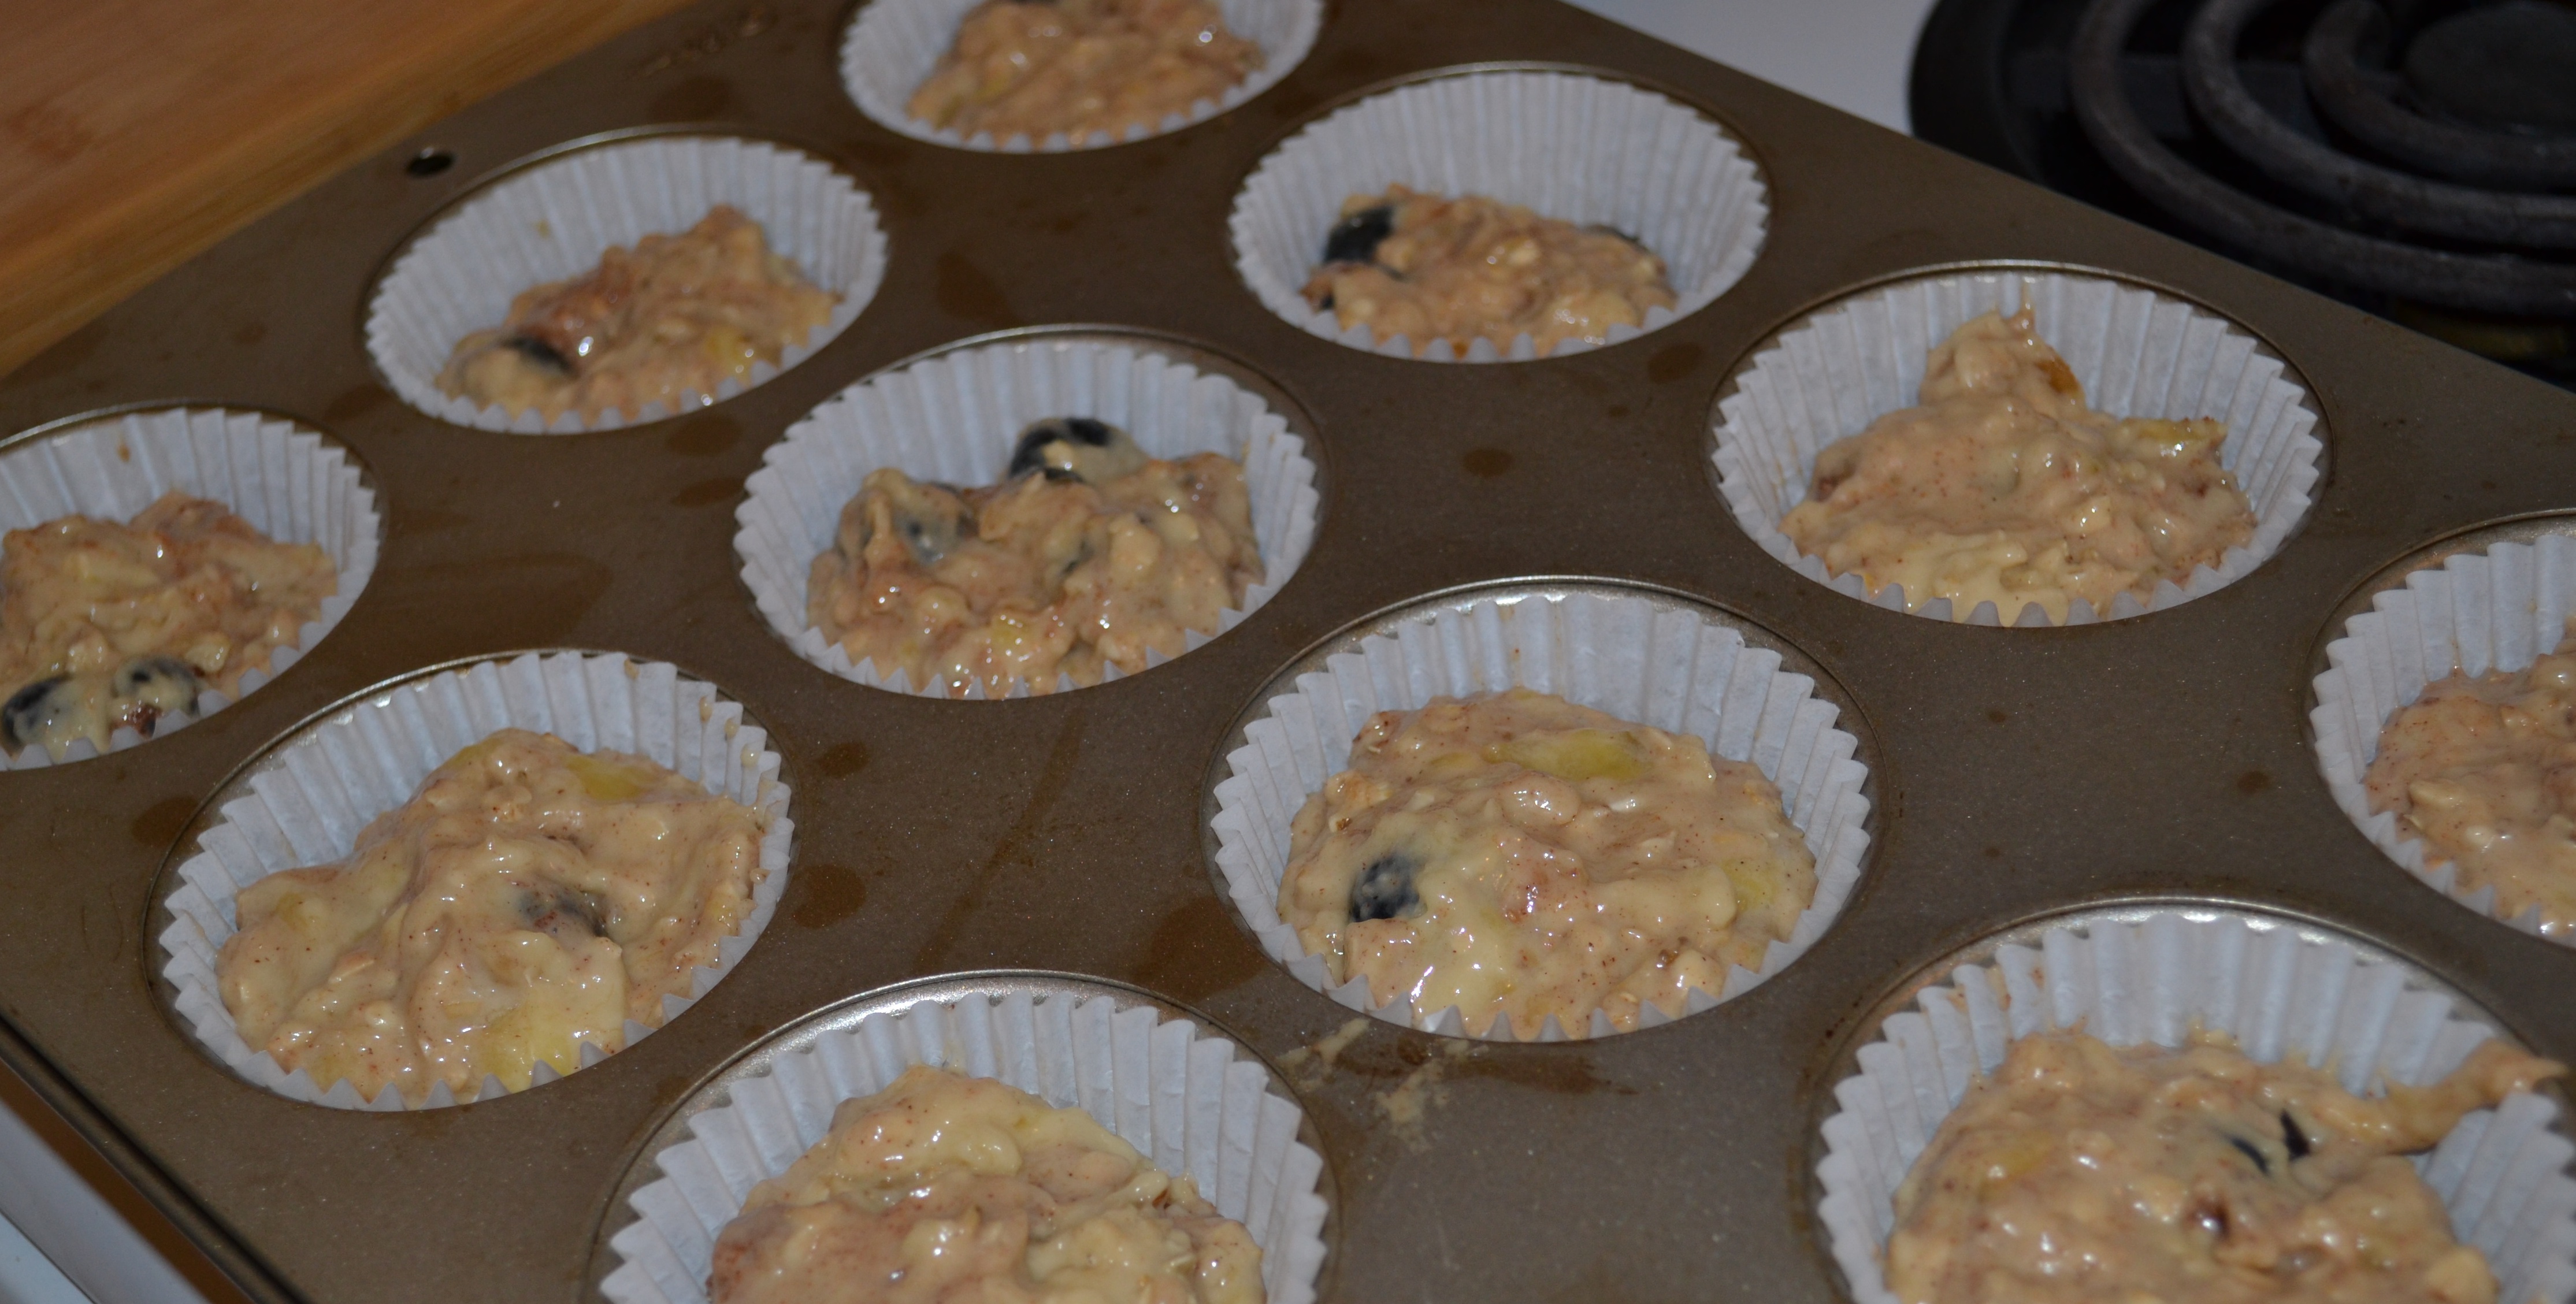 in the muffin tray - before baking